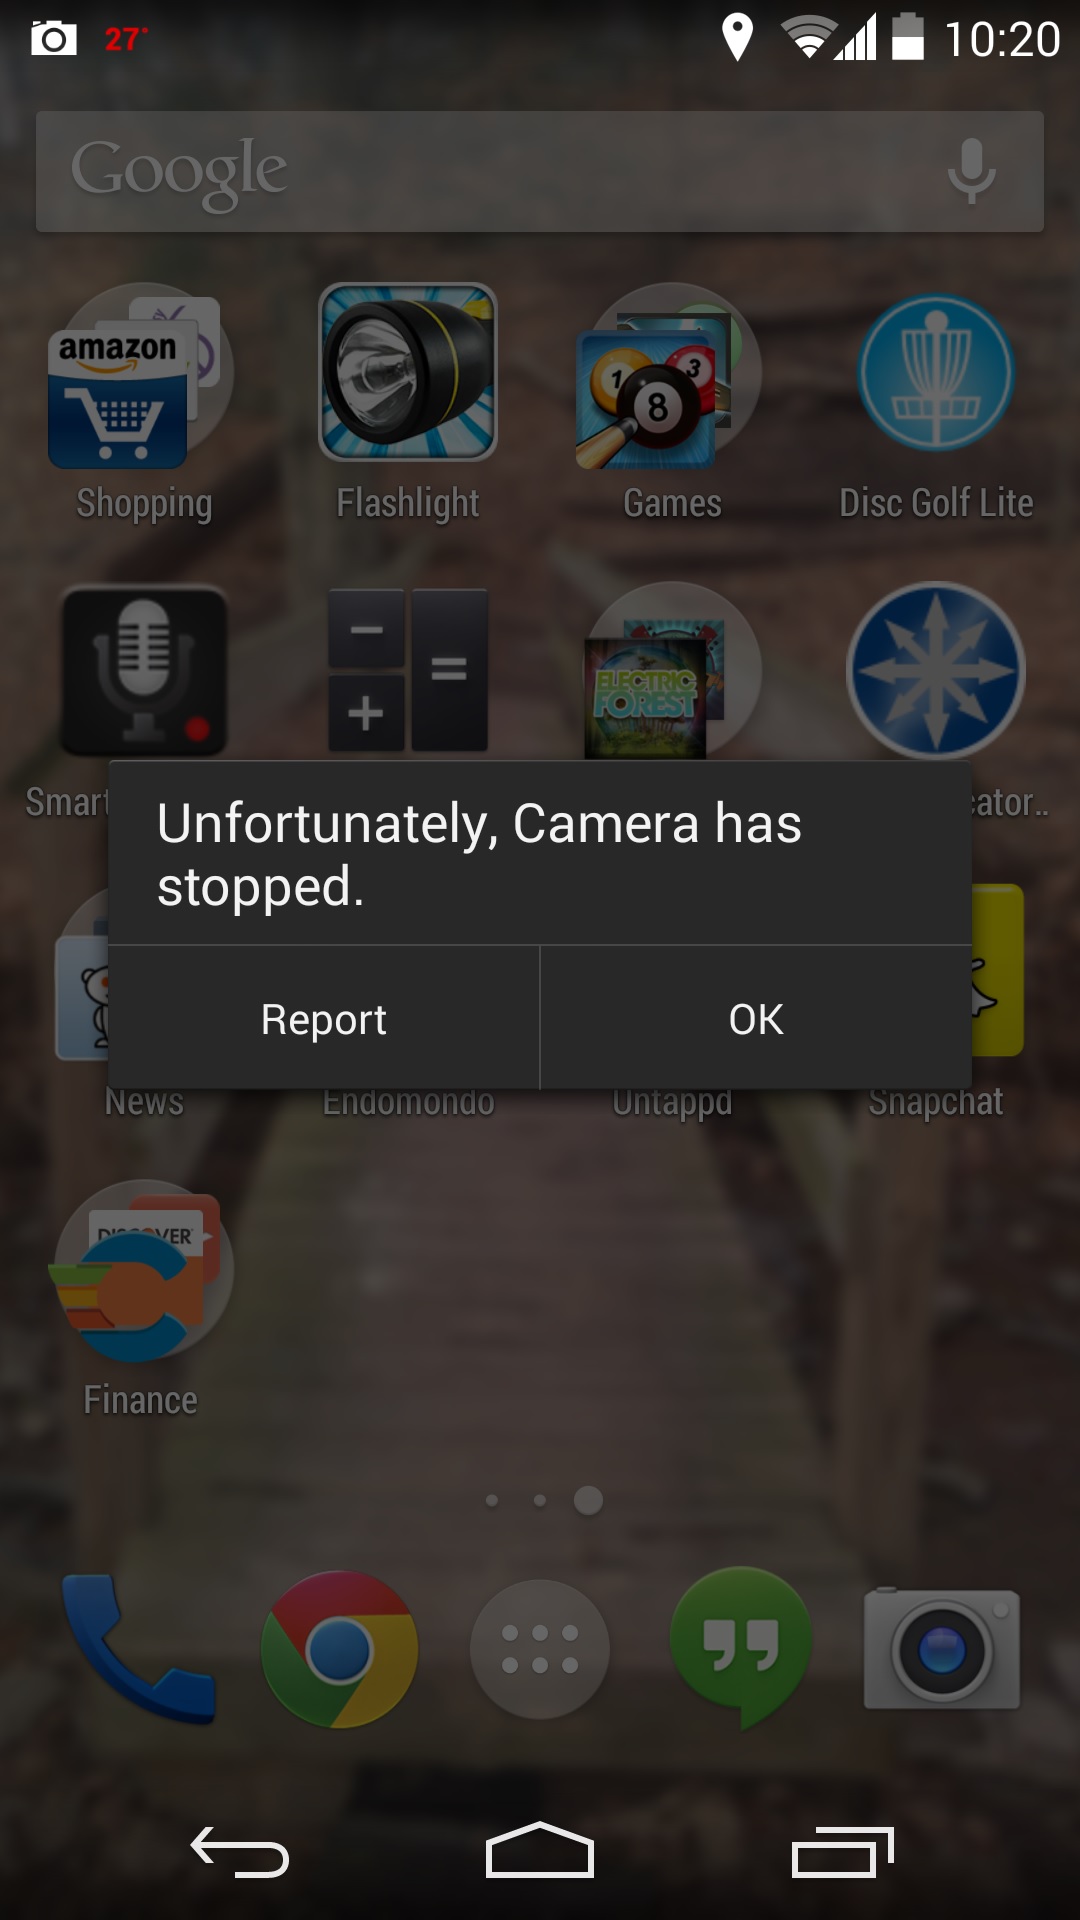 How to fix it Unfortunately, the camera stopped on Android